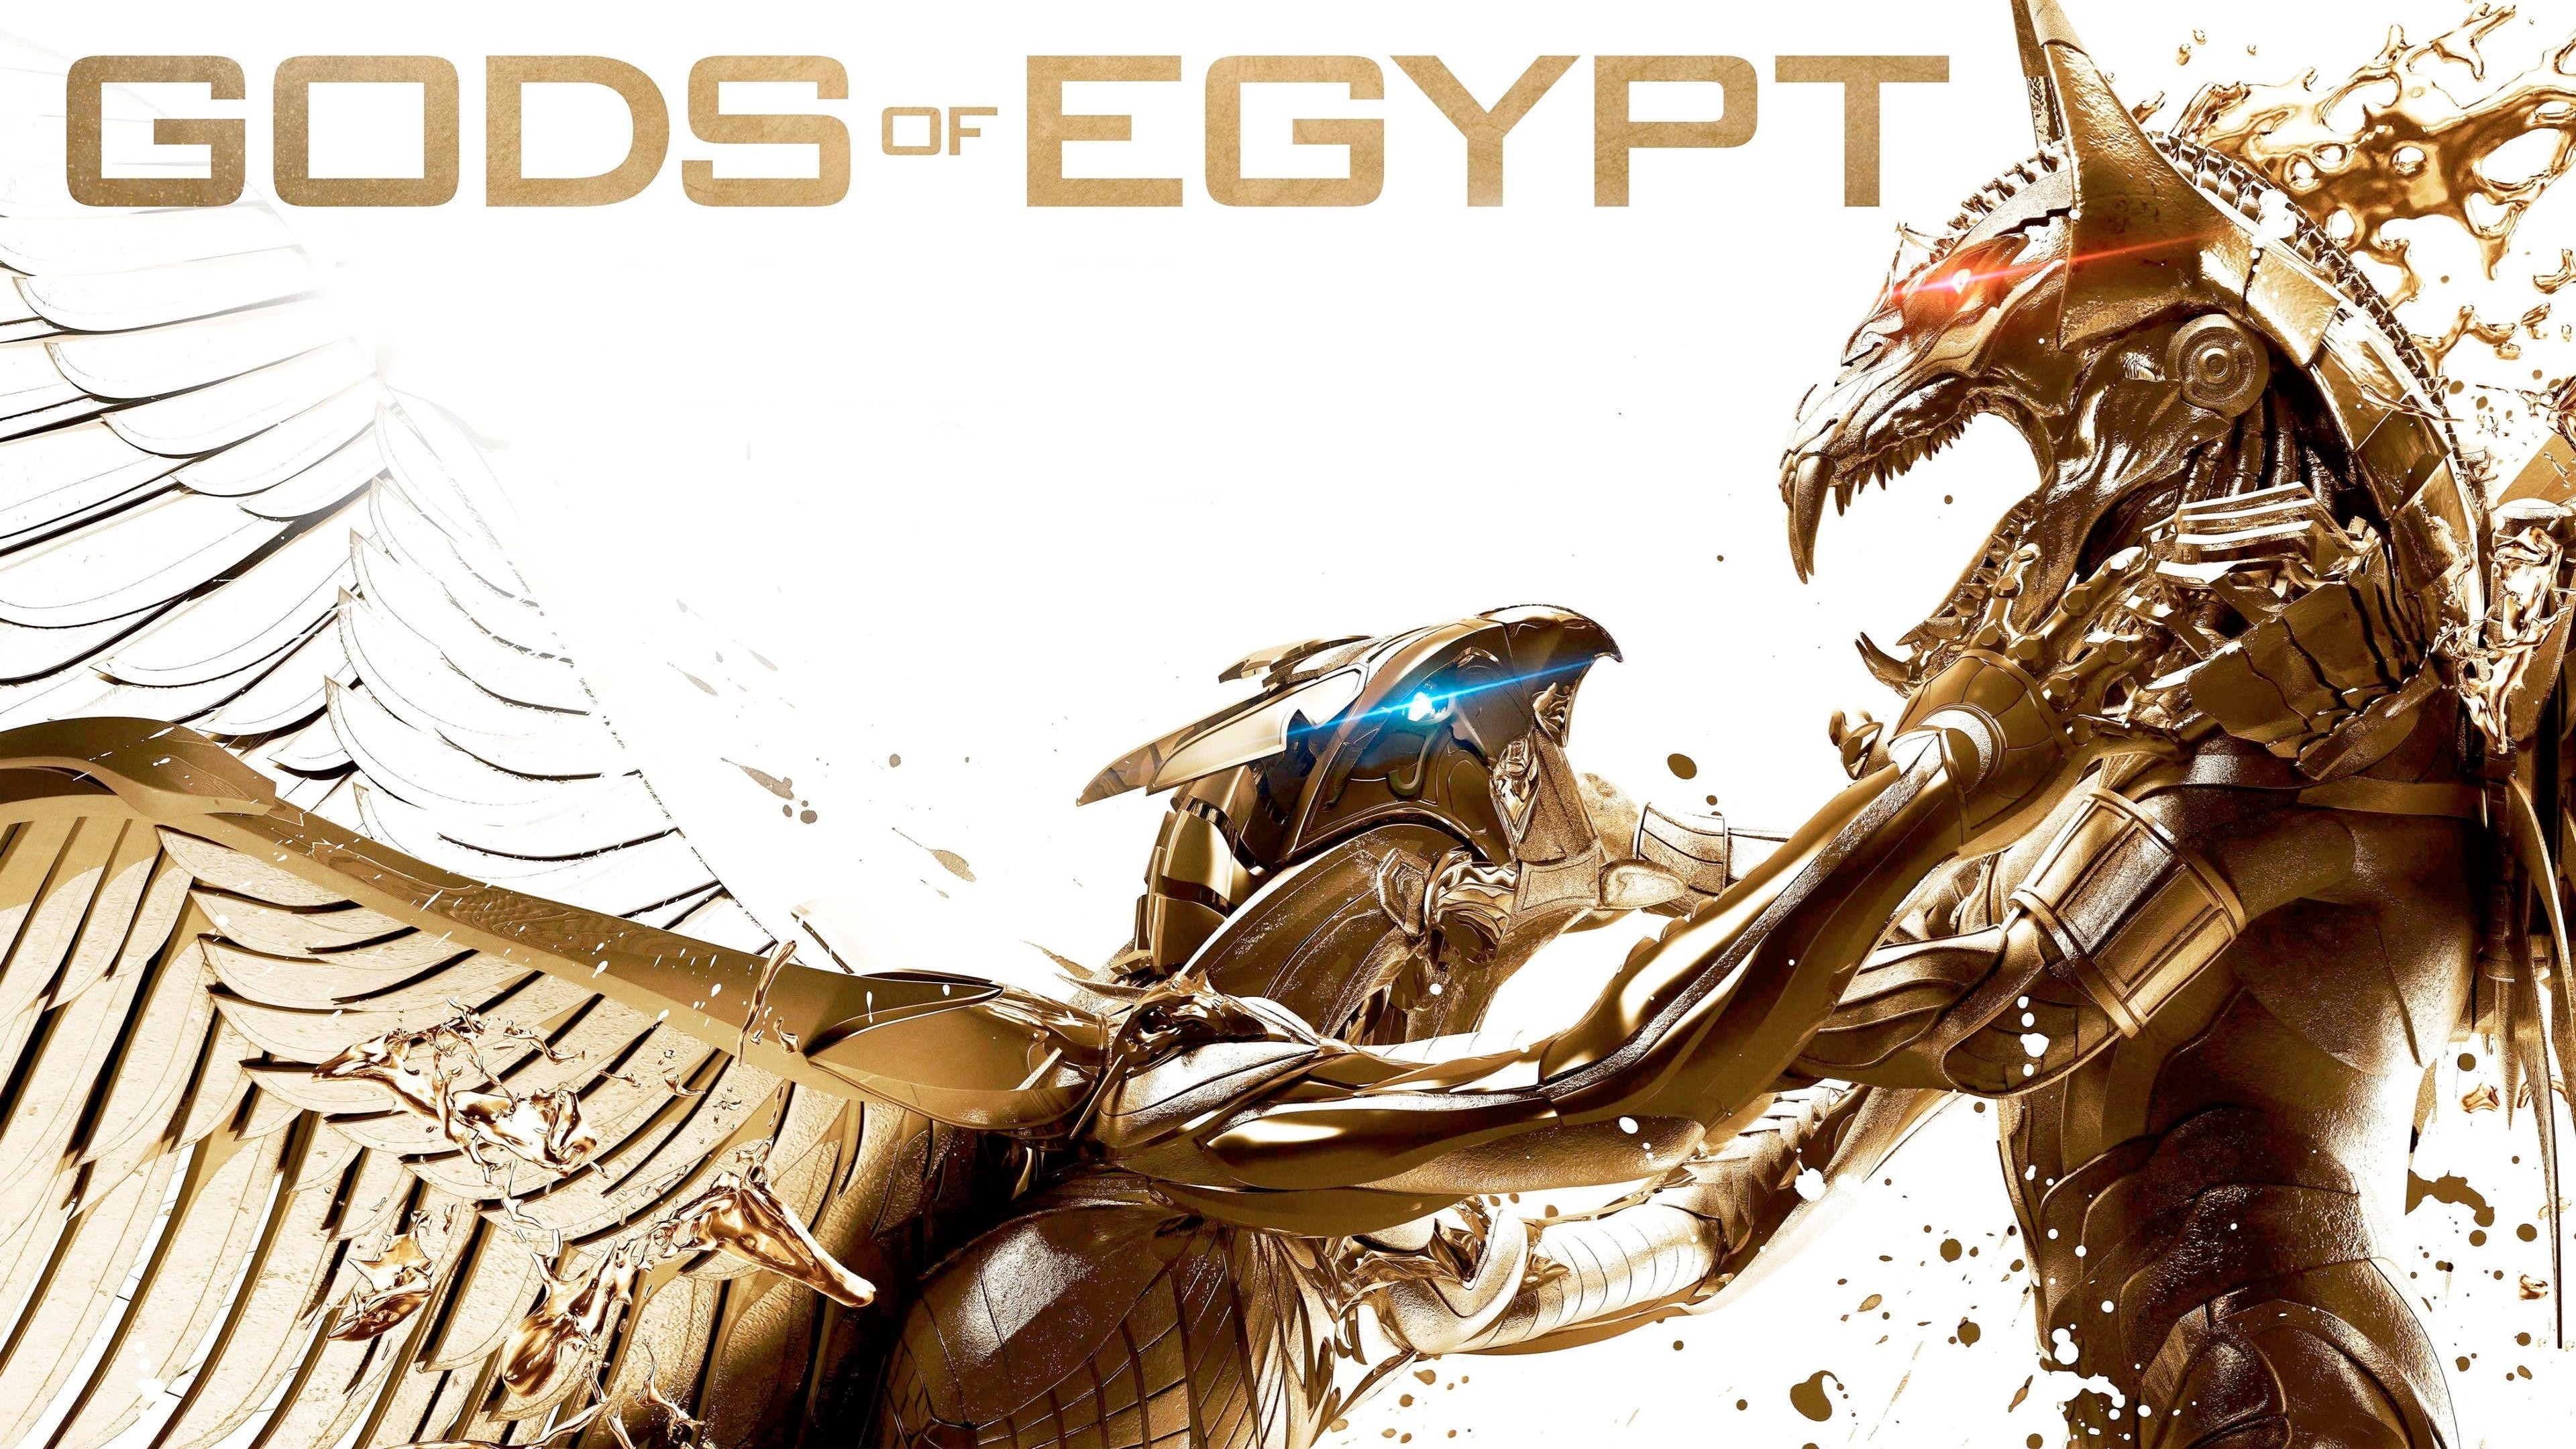 3840x2160 22 Gods Of Egypt HD Wallpapers | Backgrounds - Wallpaper Abyss